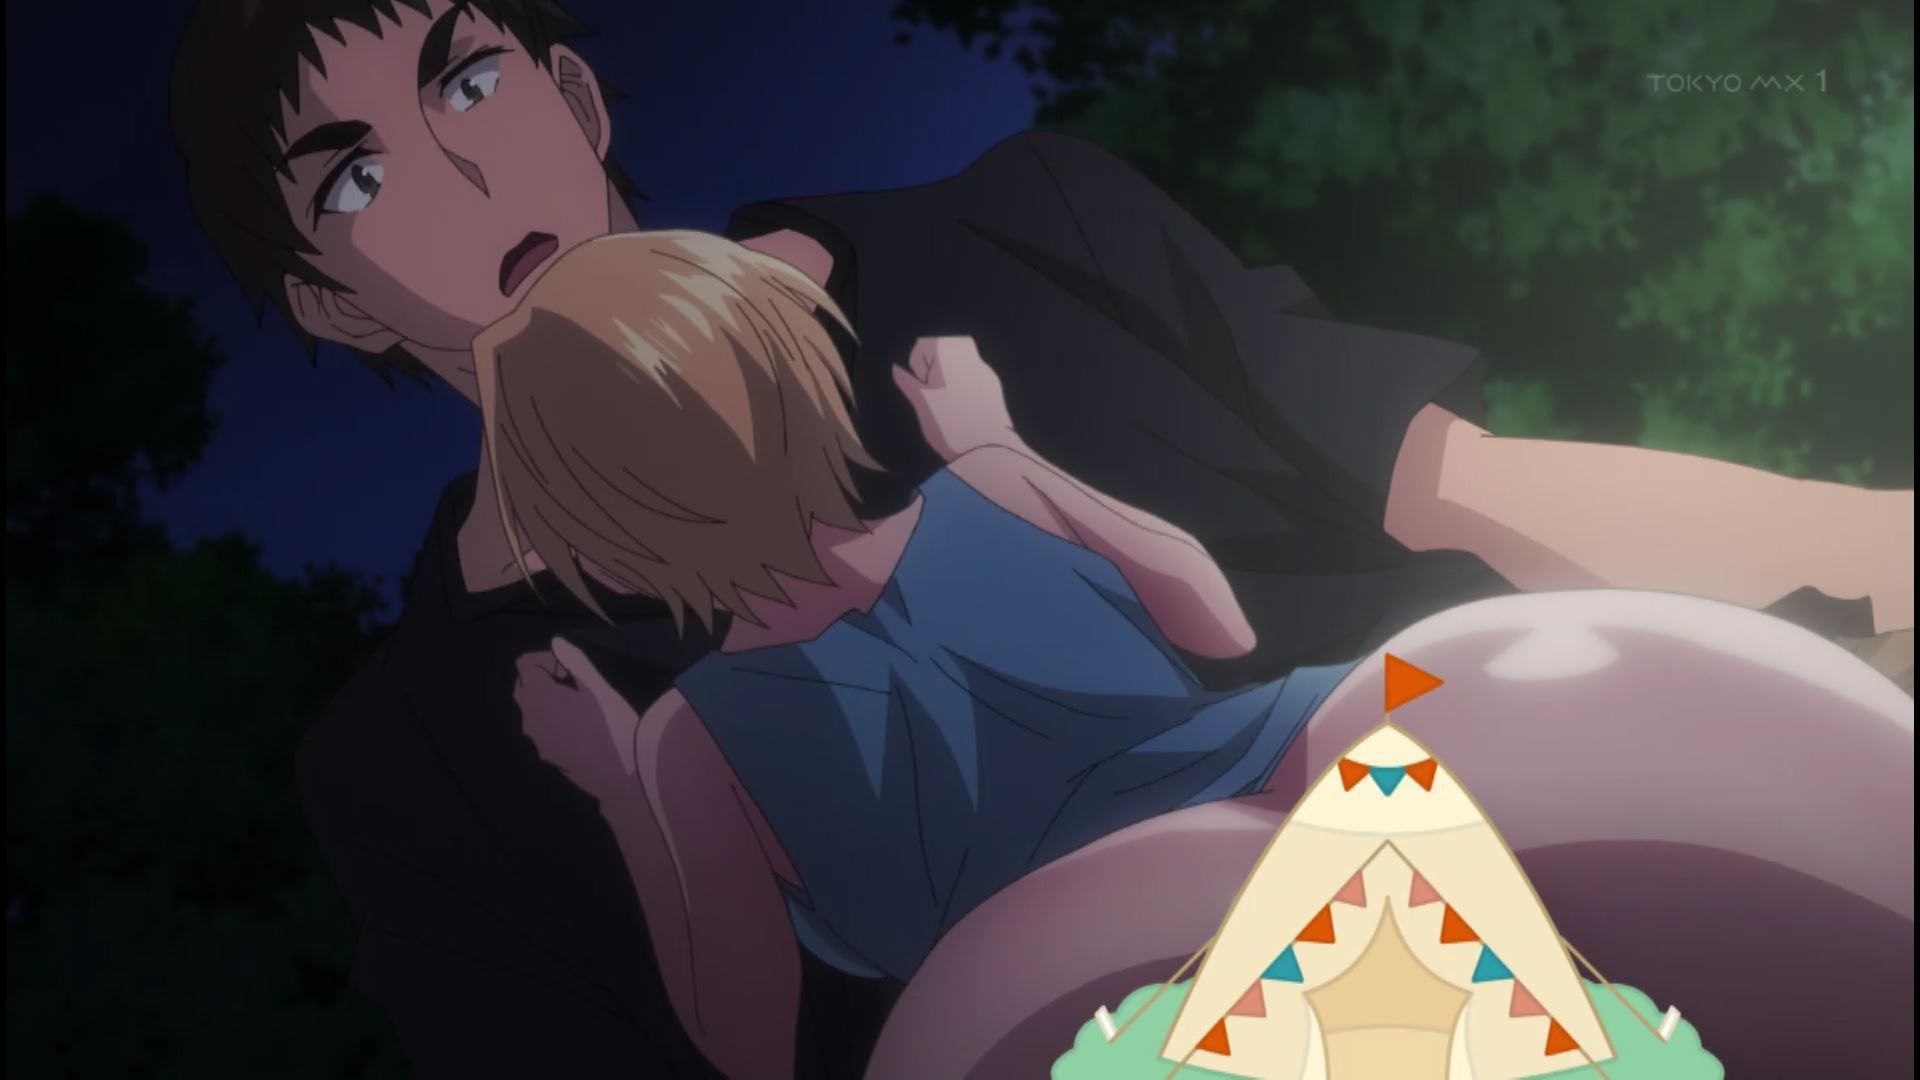 outdoors in episode 7 of the anime "Harem Kyampu!" And go straight to the ecchi scene! 21